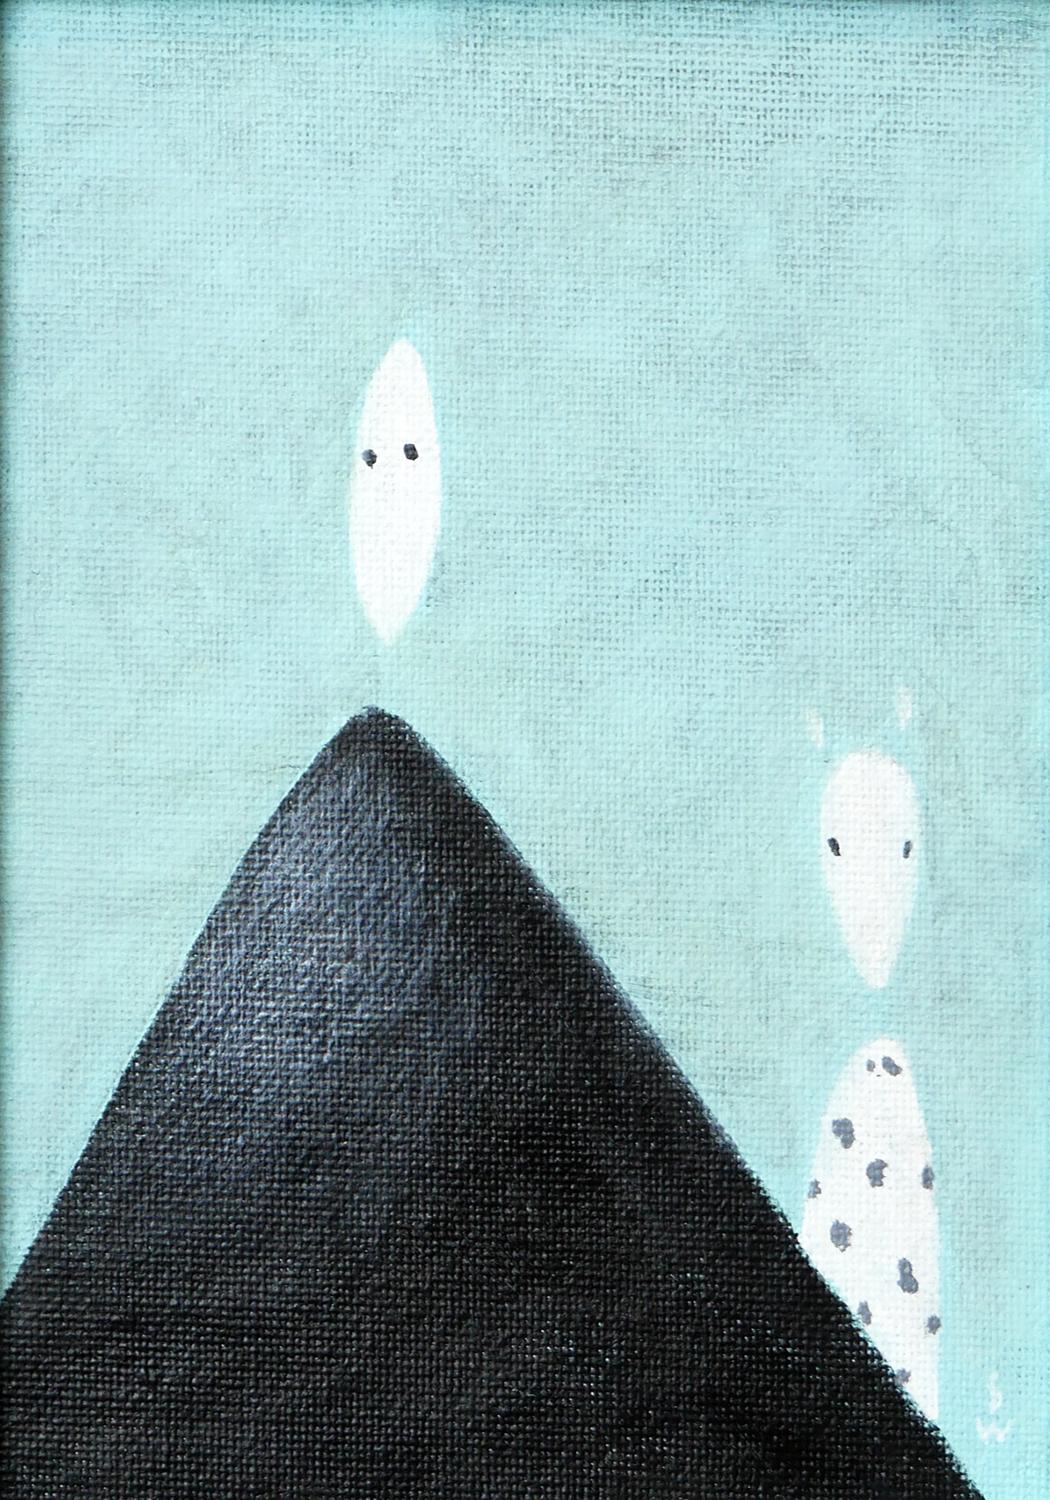 “2Duo with Totem Frame” Aqua and Black Contemporary Surrealist Painting 2